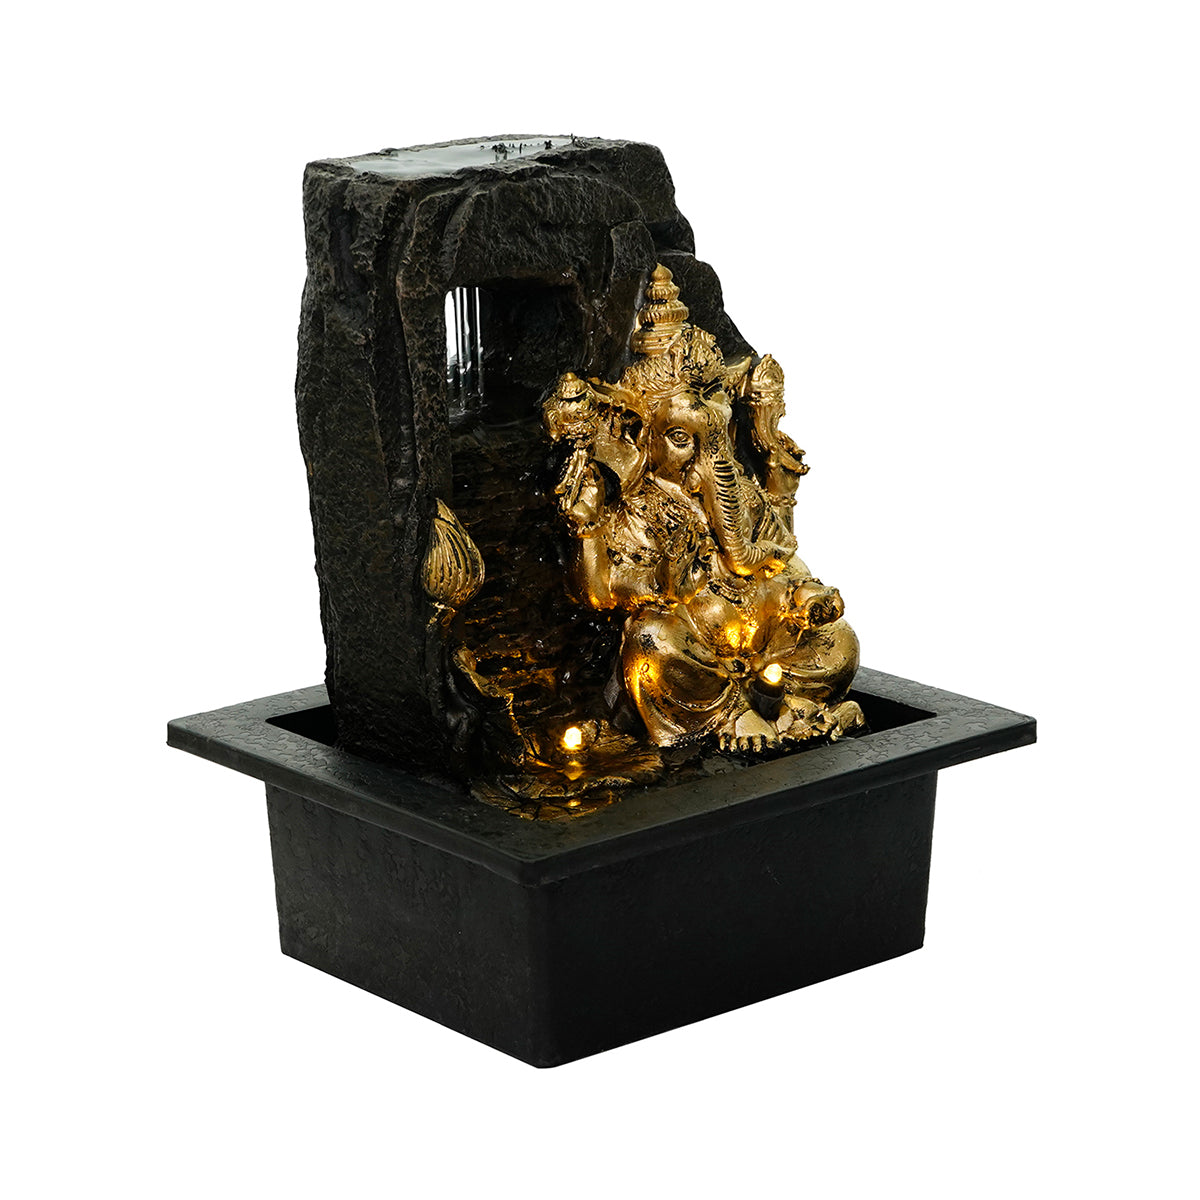 Polystone Black and Golden Lord Ganesha Water Fountain With Light For Home/Office/Indoor Decor 3